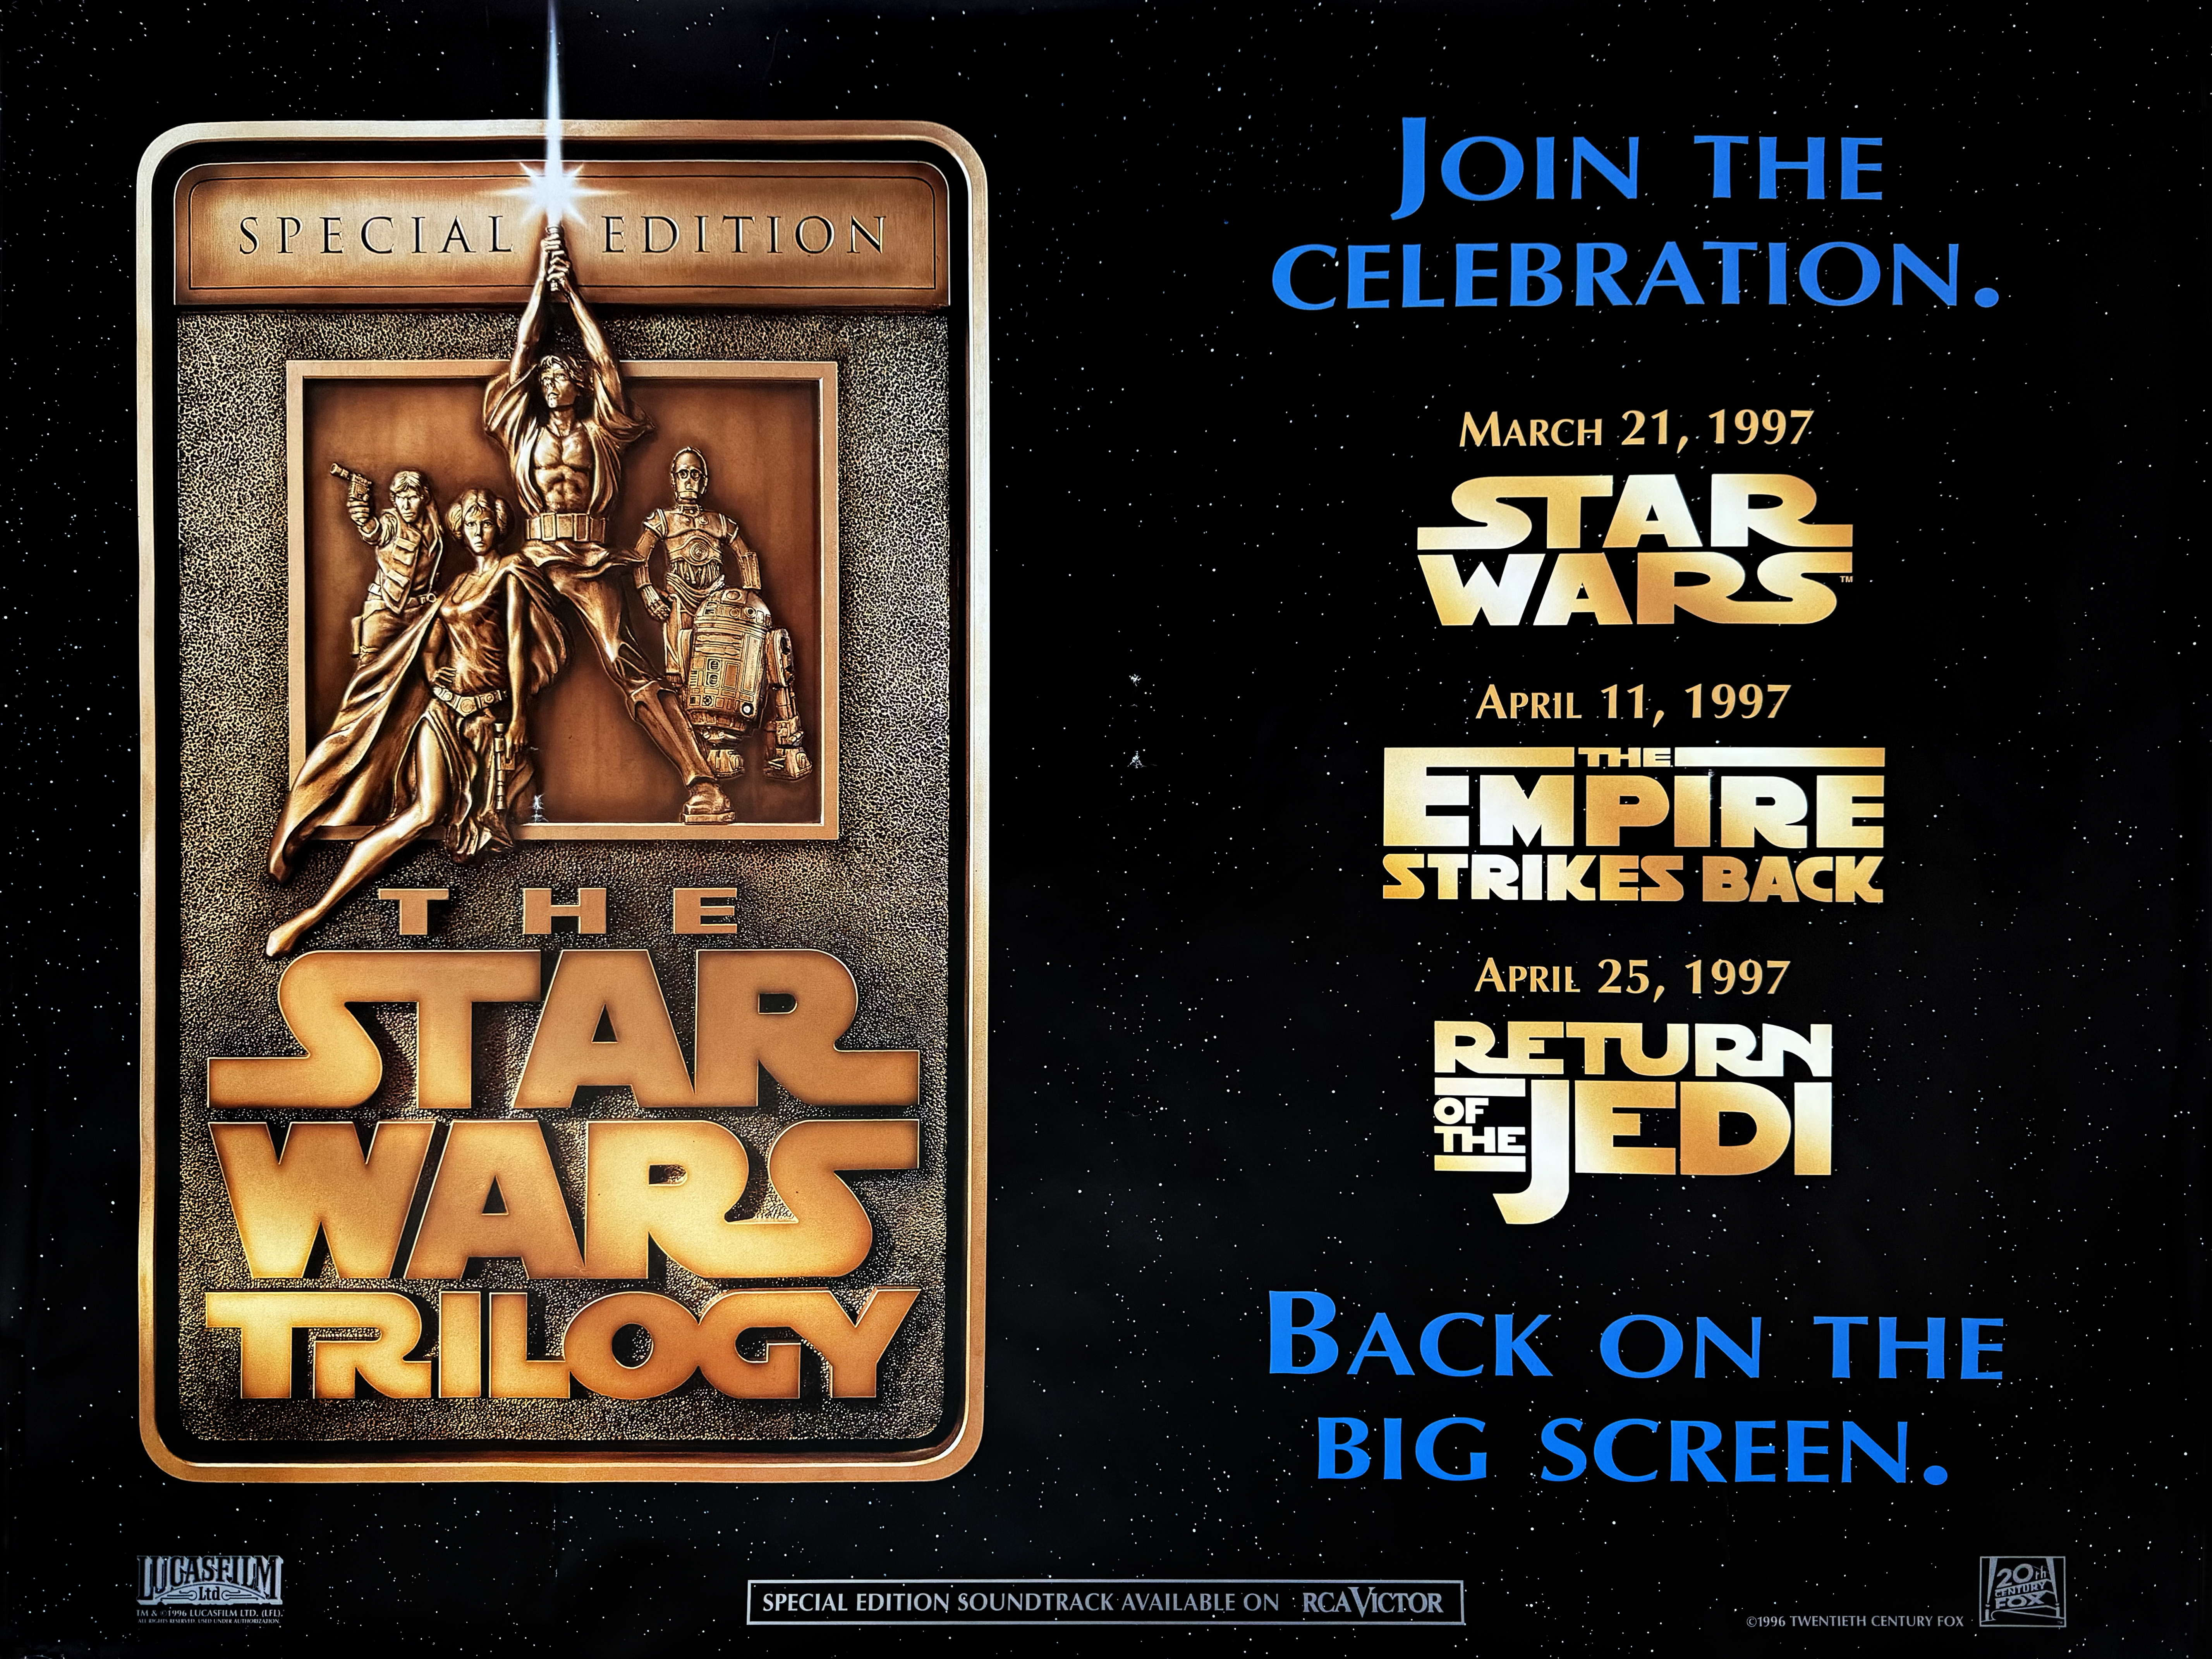 Star Wars trilogy special edition movie quad poster